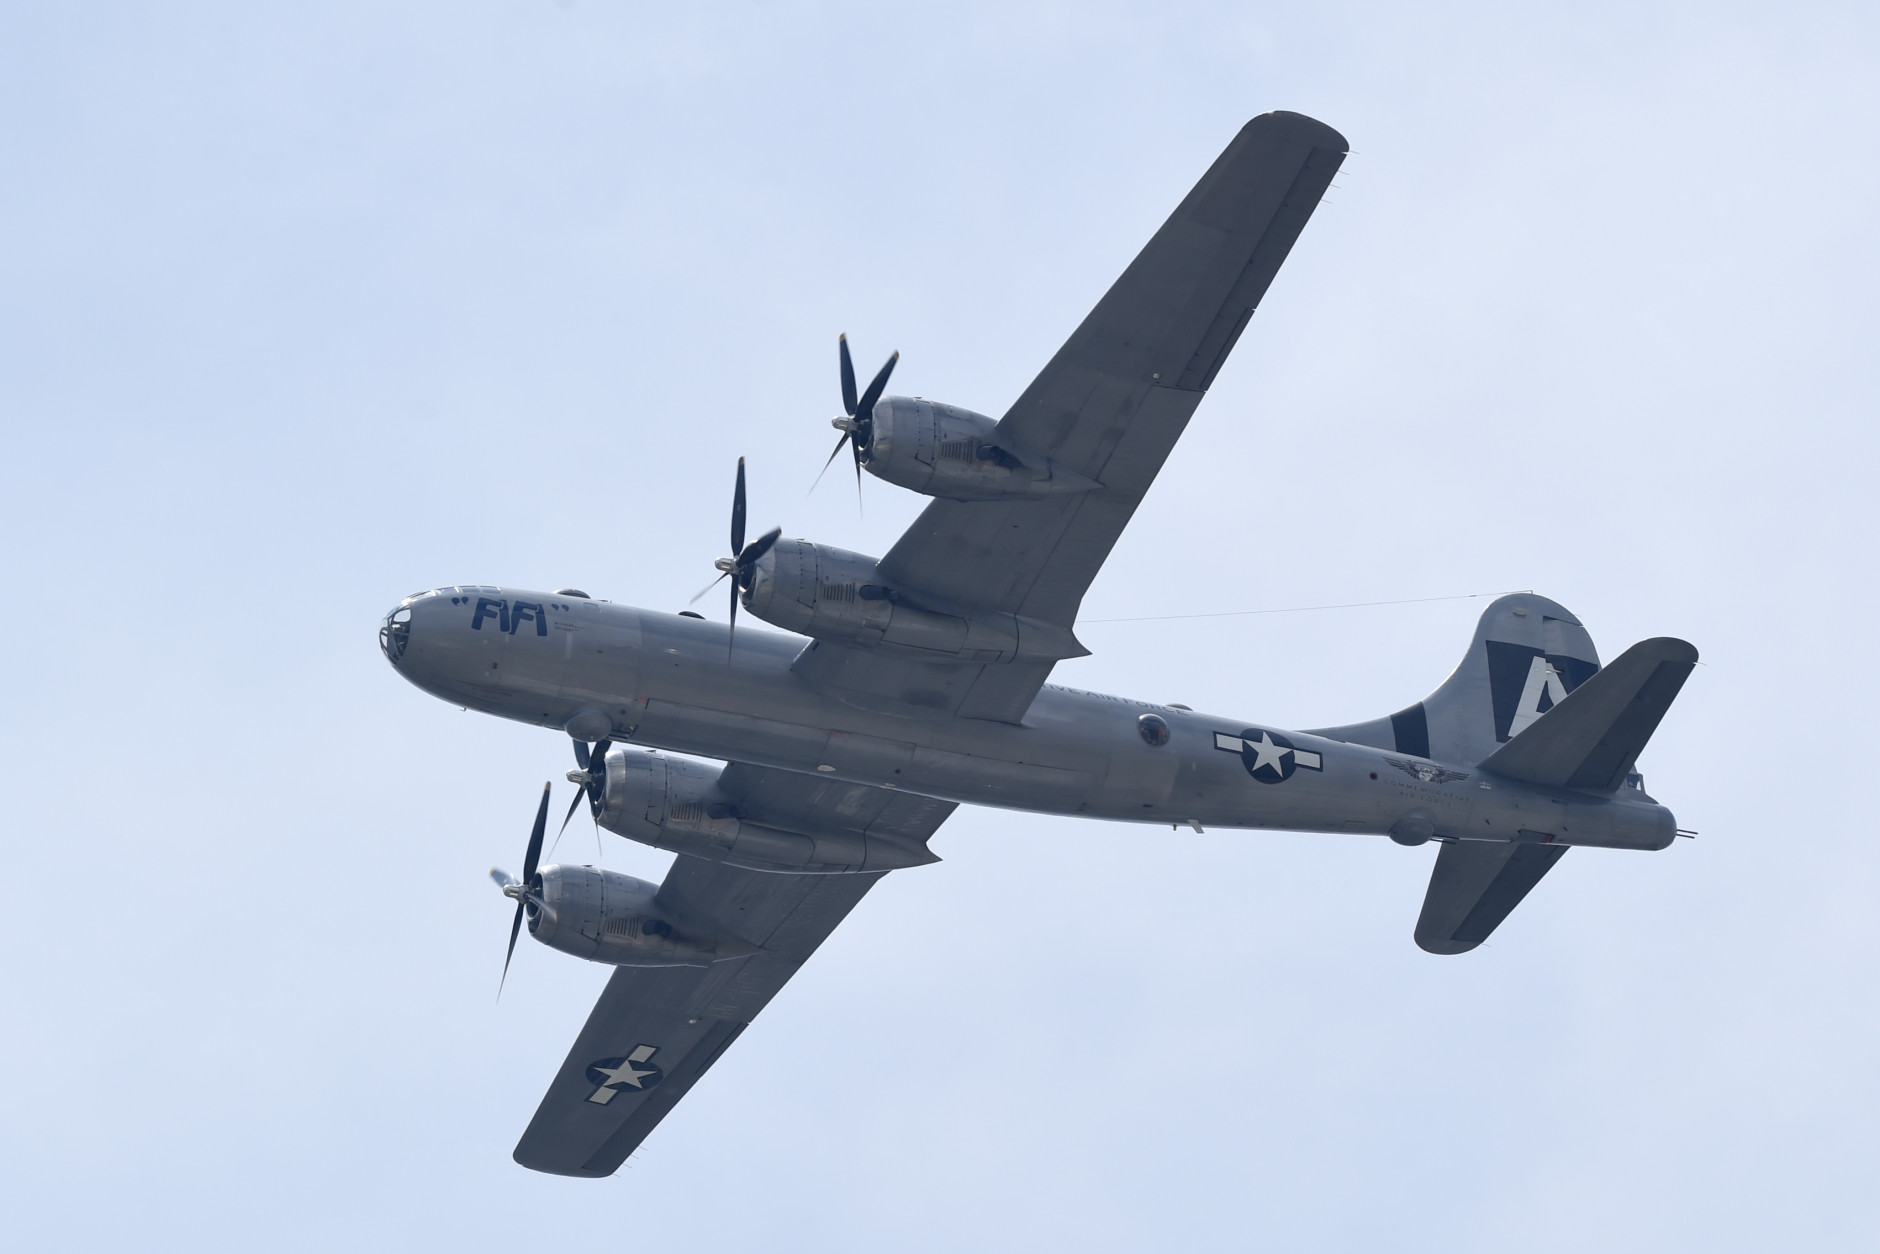 The B-29 Superfortress named "Fifi" and the plane that dropped the atomic bomb, flies over the skies of Washington, Friday, May 8, 2015. Dozens of vintage military aircraft from World War II made the flight over the nation's capital to mark the 70th anniversary of Victory in Europe Day. (AP Photo/Susan Walsh)